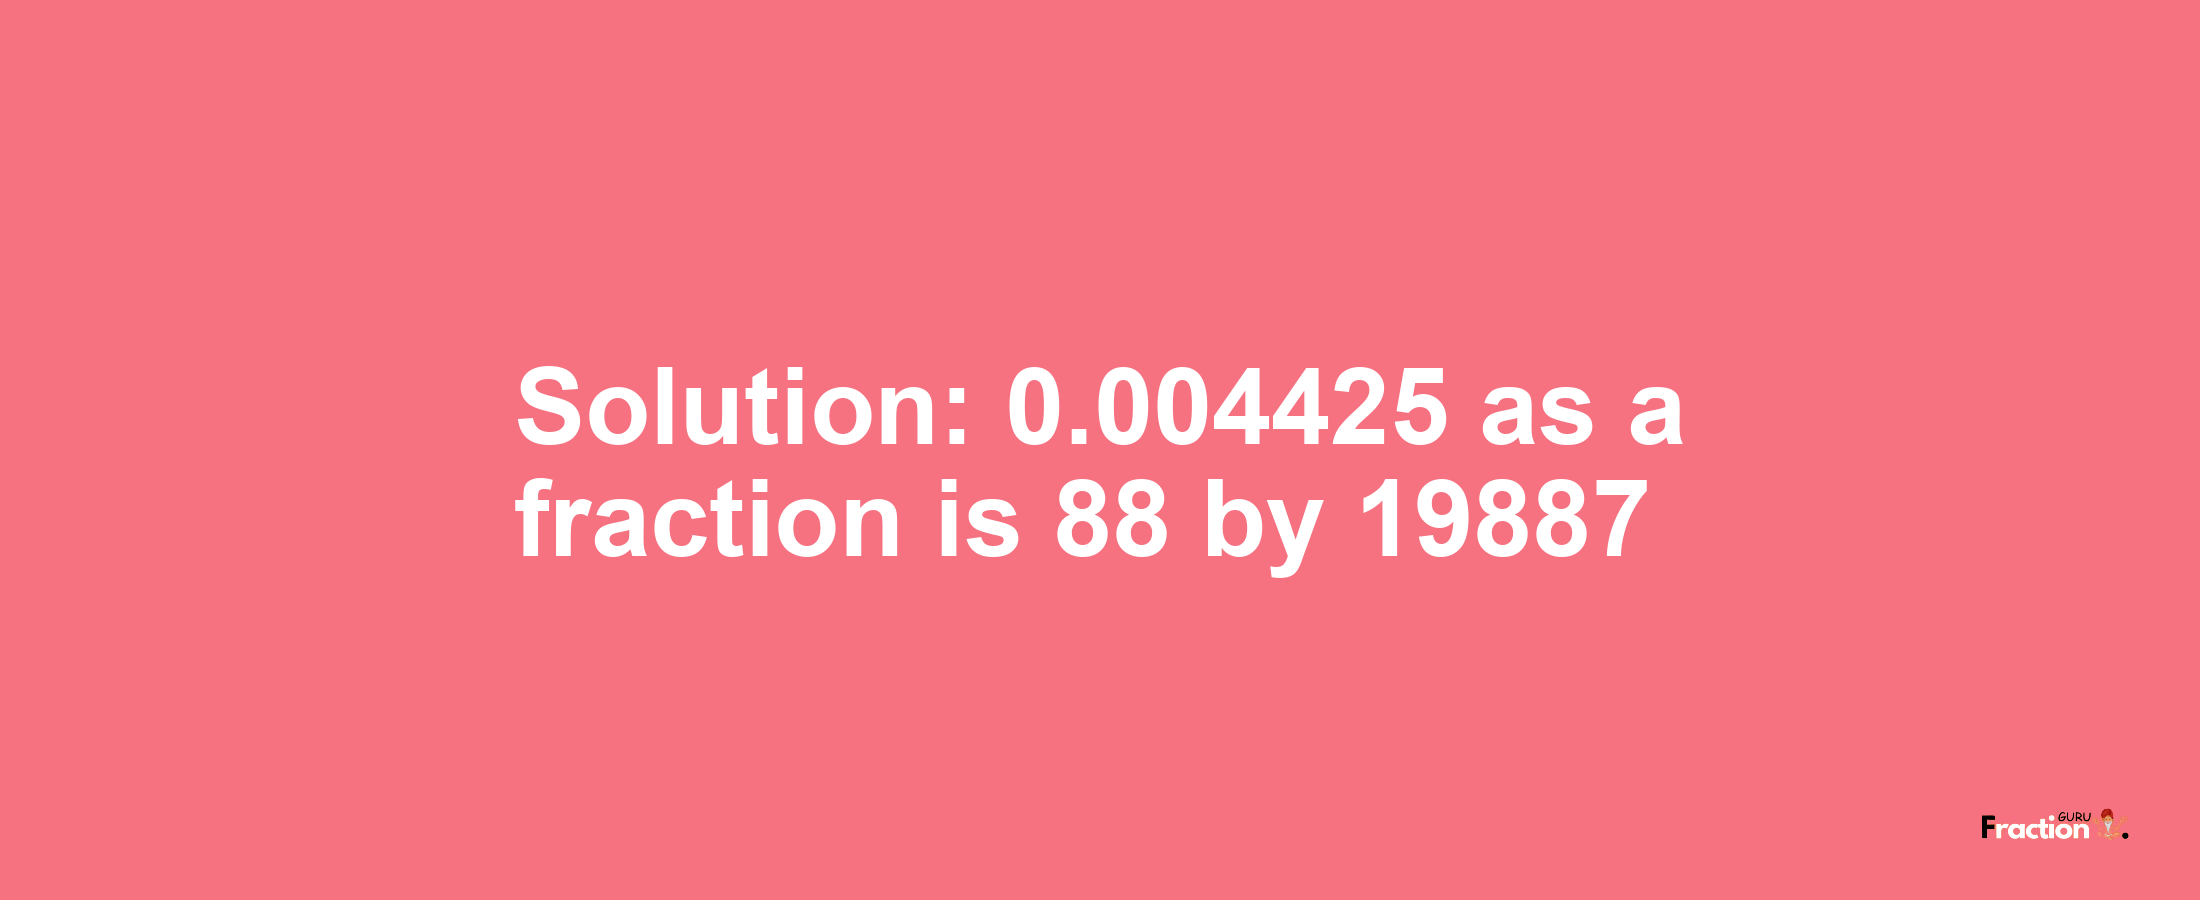 Solution:0.004425 as a fraction is 88/19887